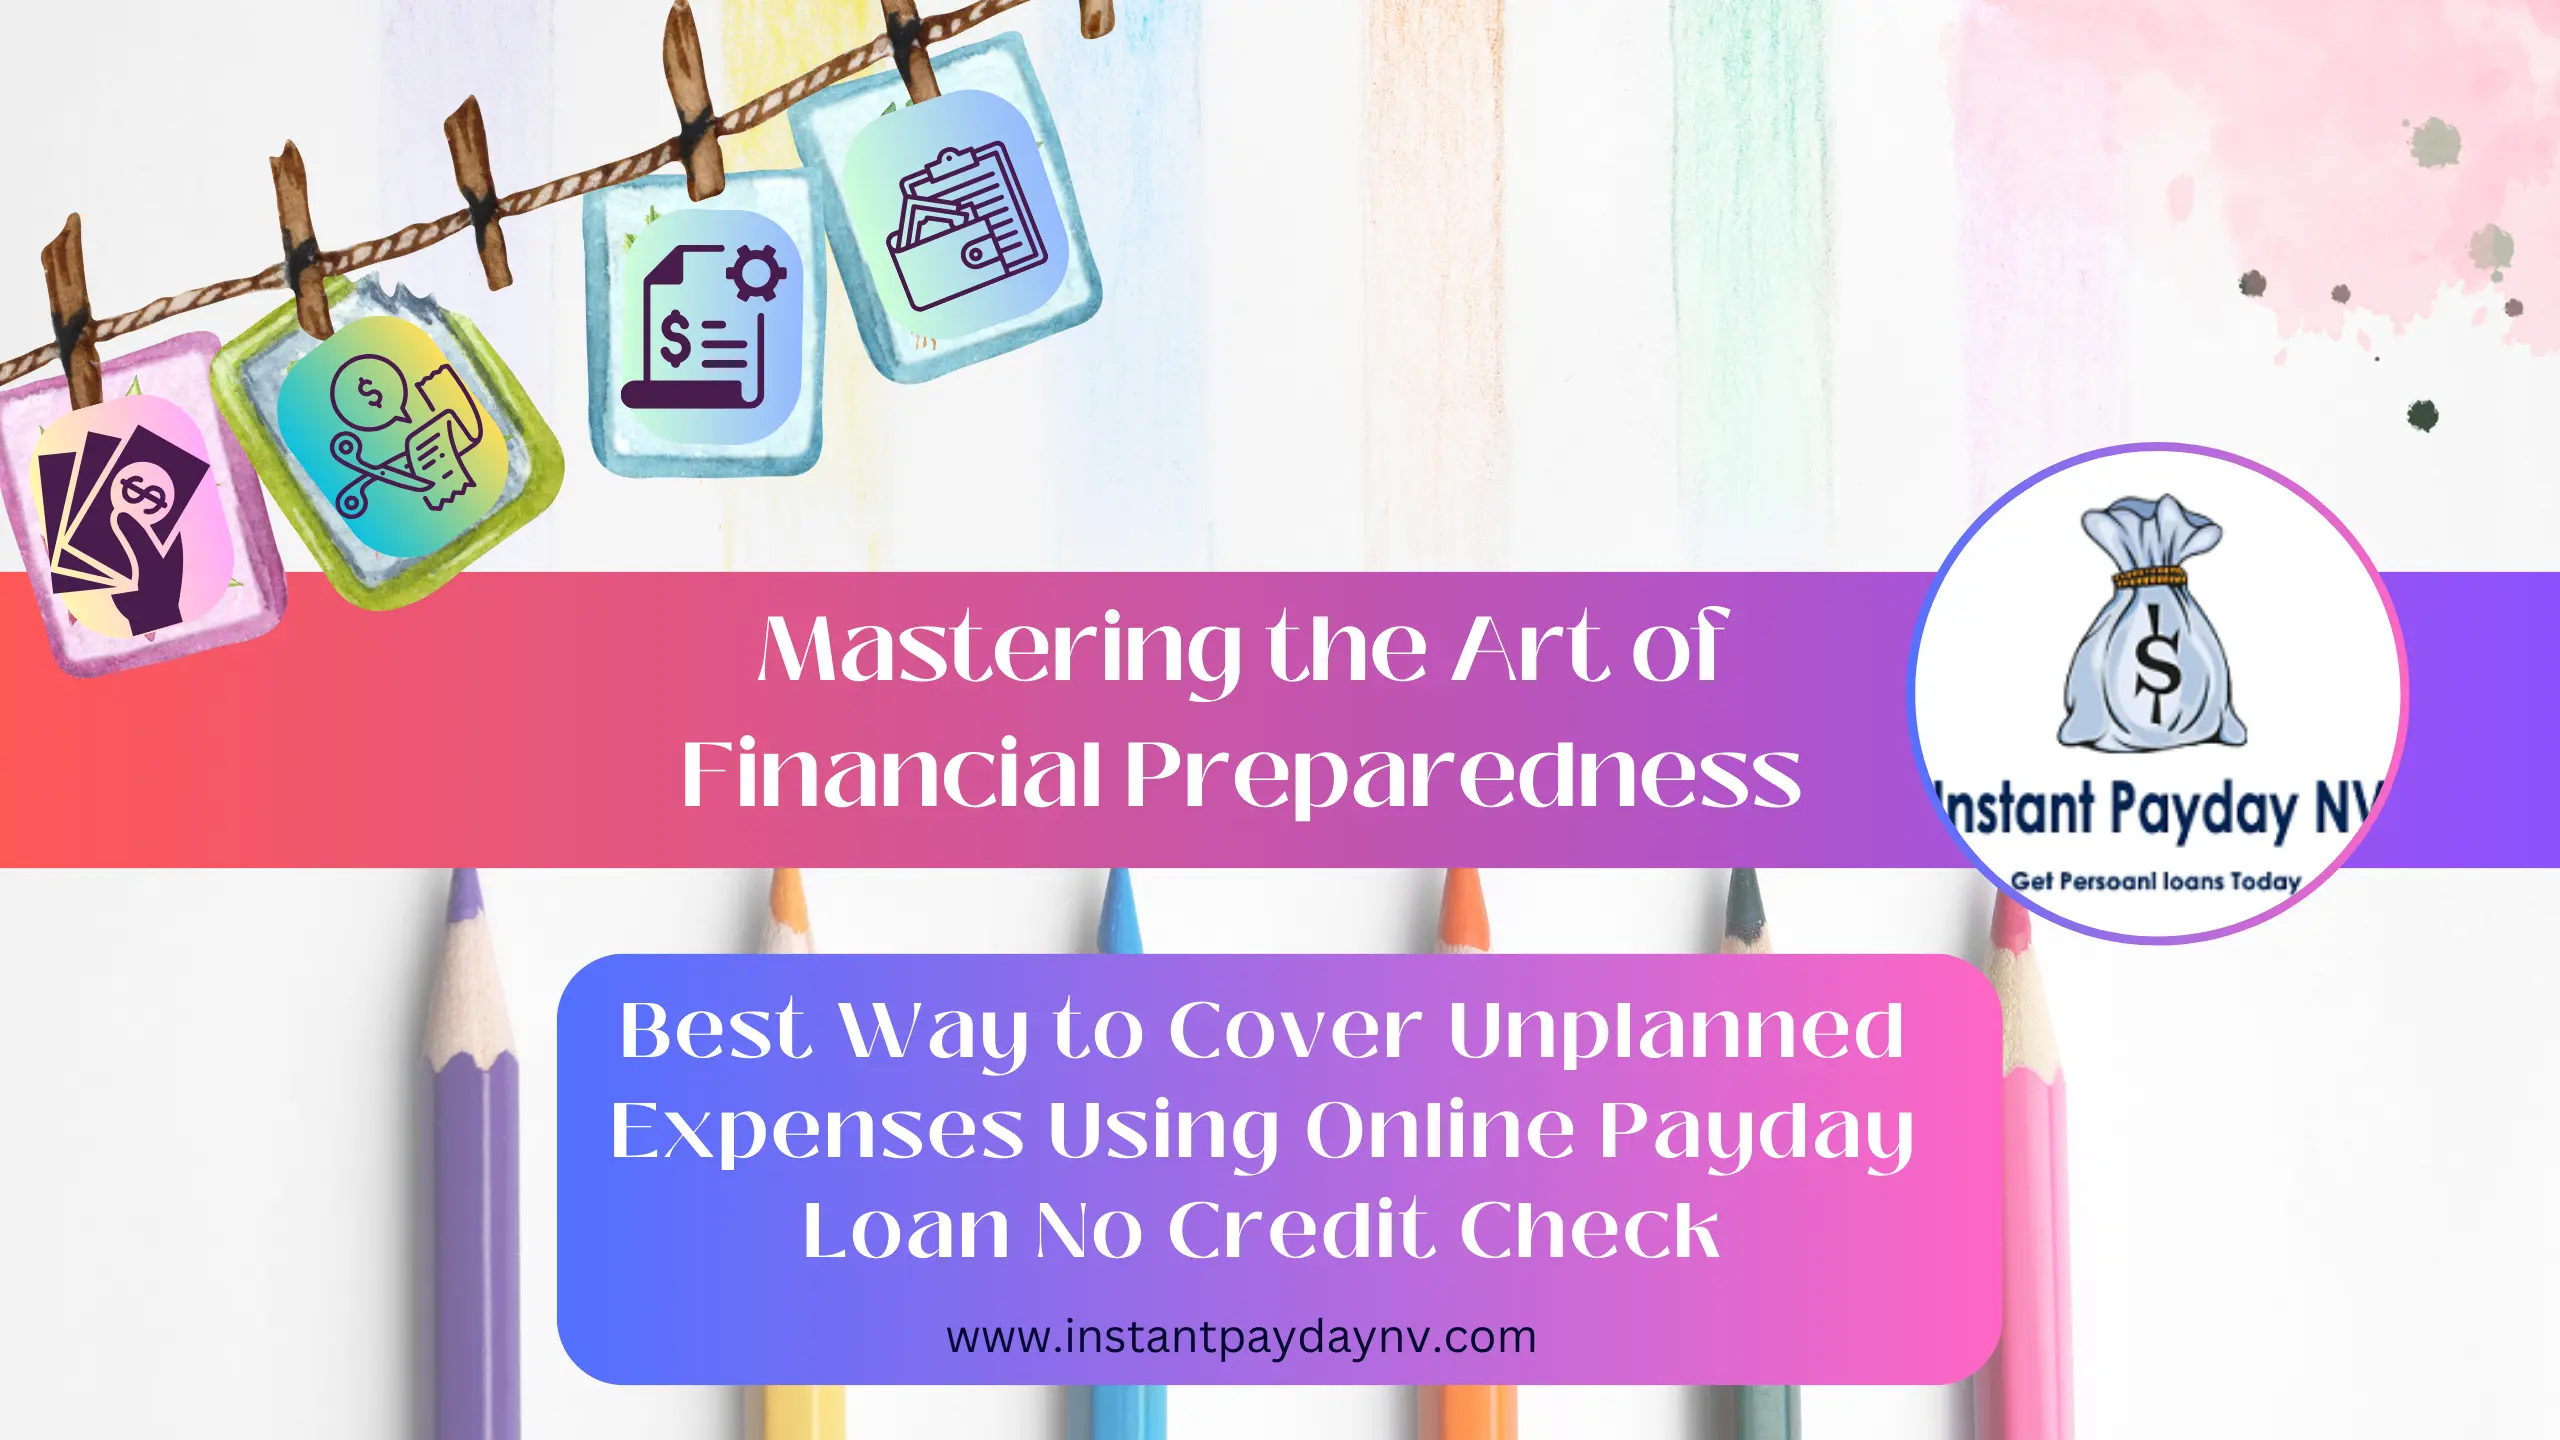 Mastering the Art of Financial Preparedness Best Way to Cover Unplanned Expenses Using Online Payday Loan No Credit Check